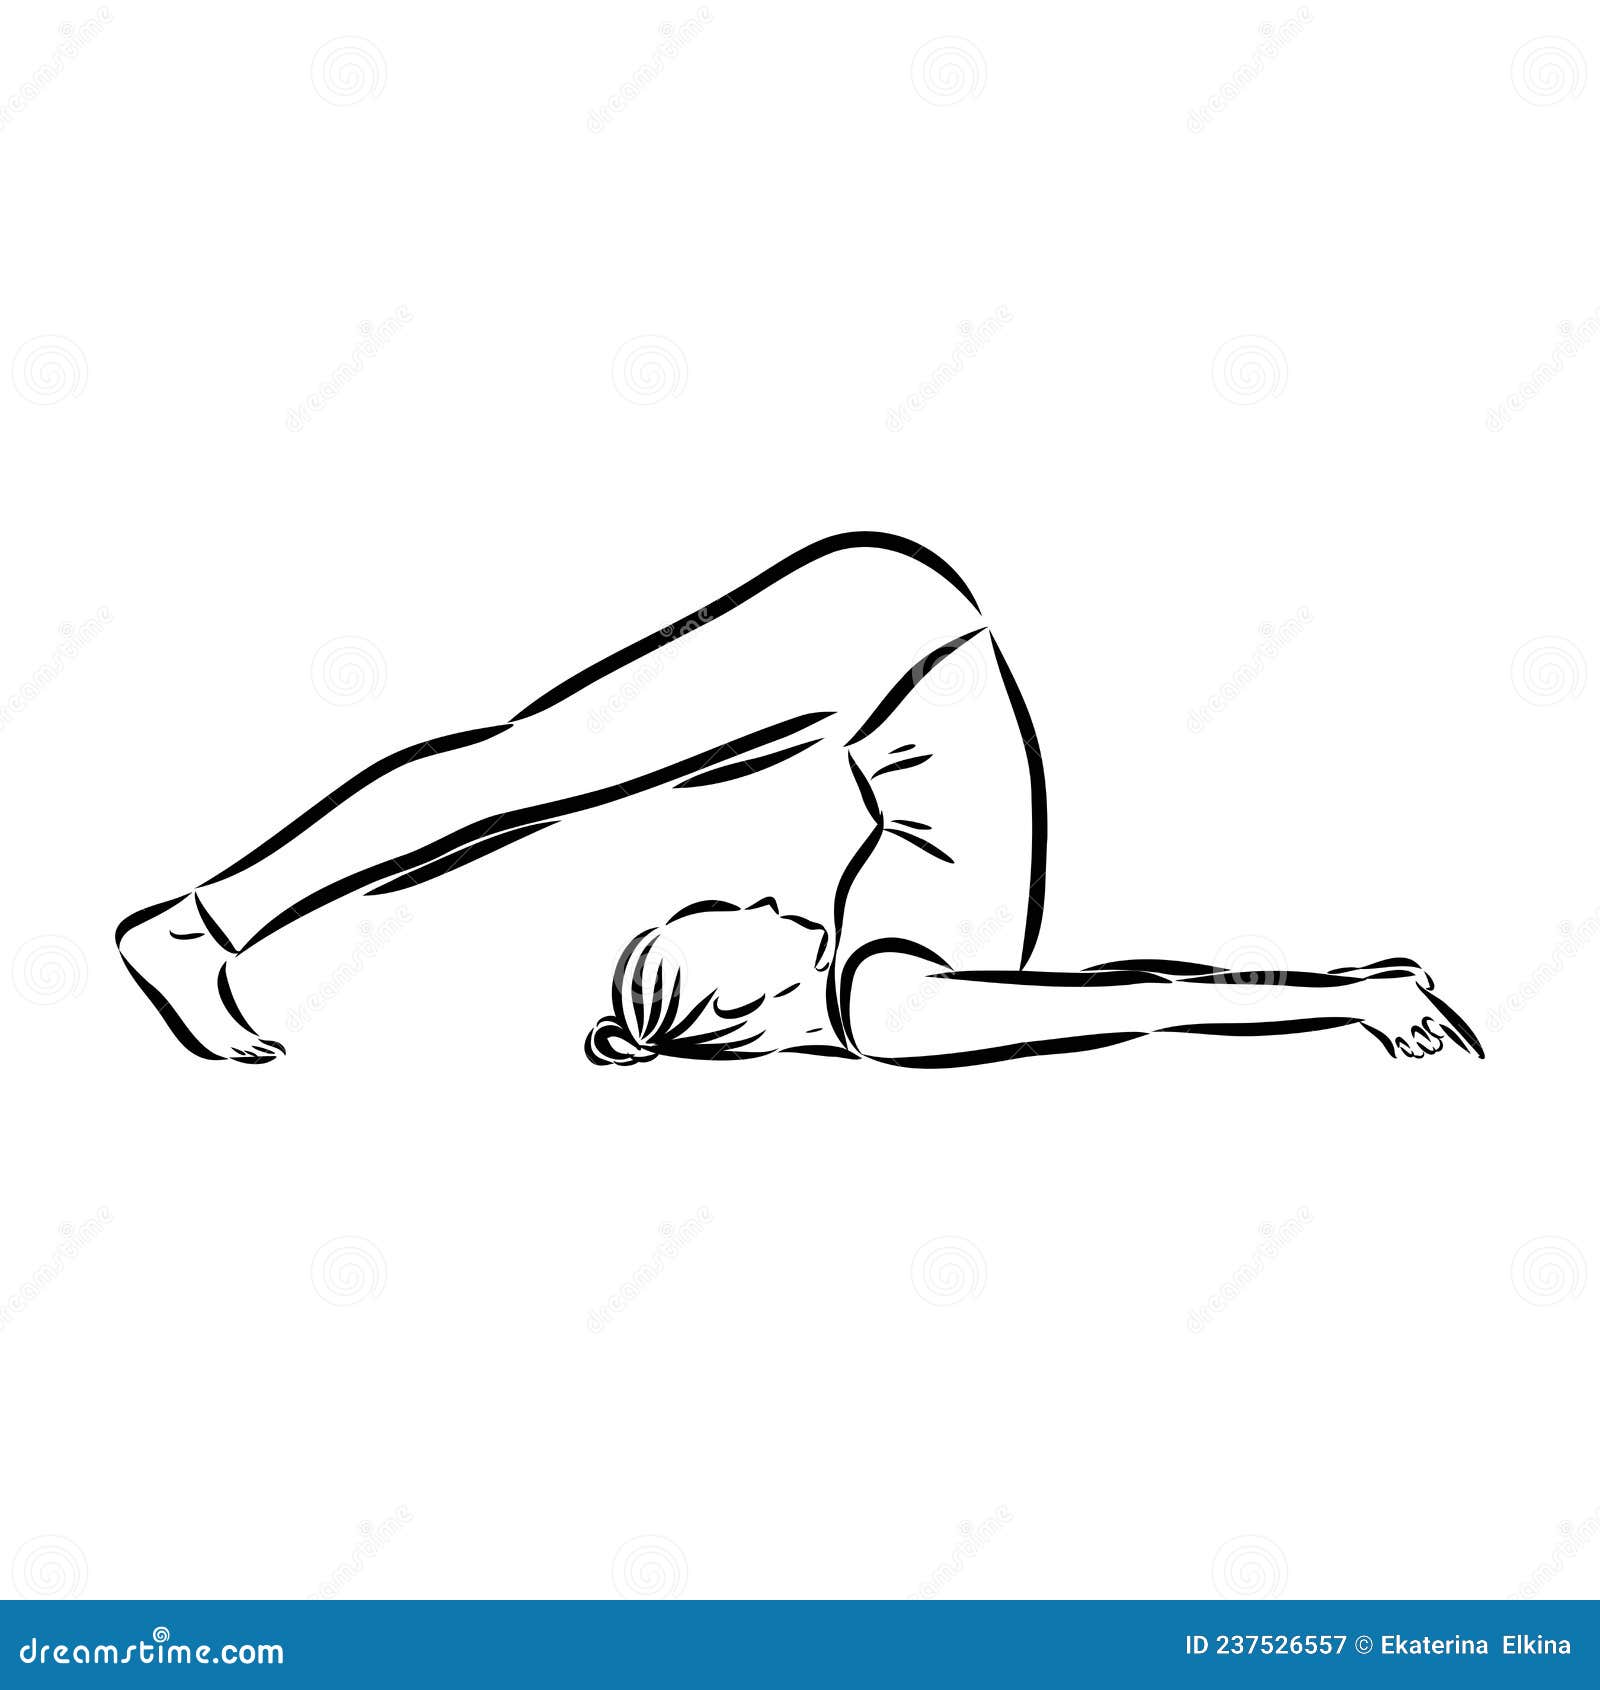 Yoga pose. Line drawing stock vector. Illustration of drawing - 237526557